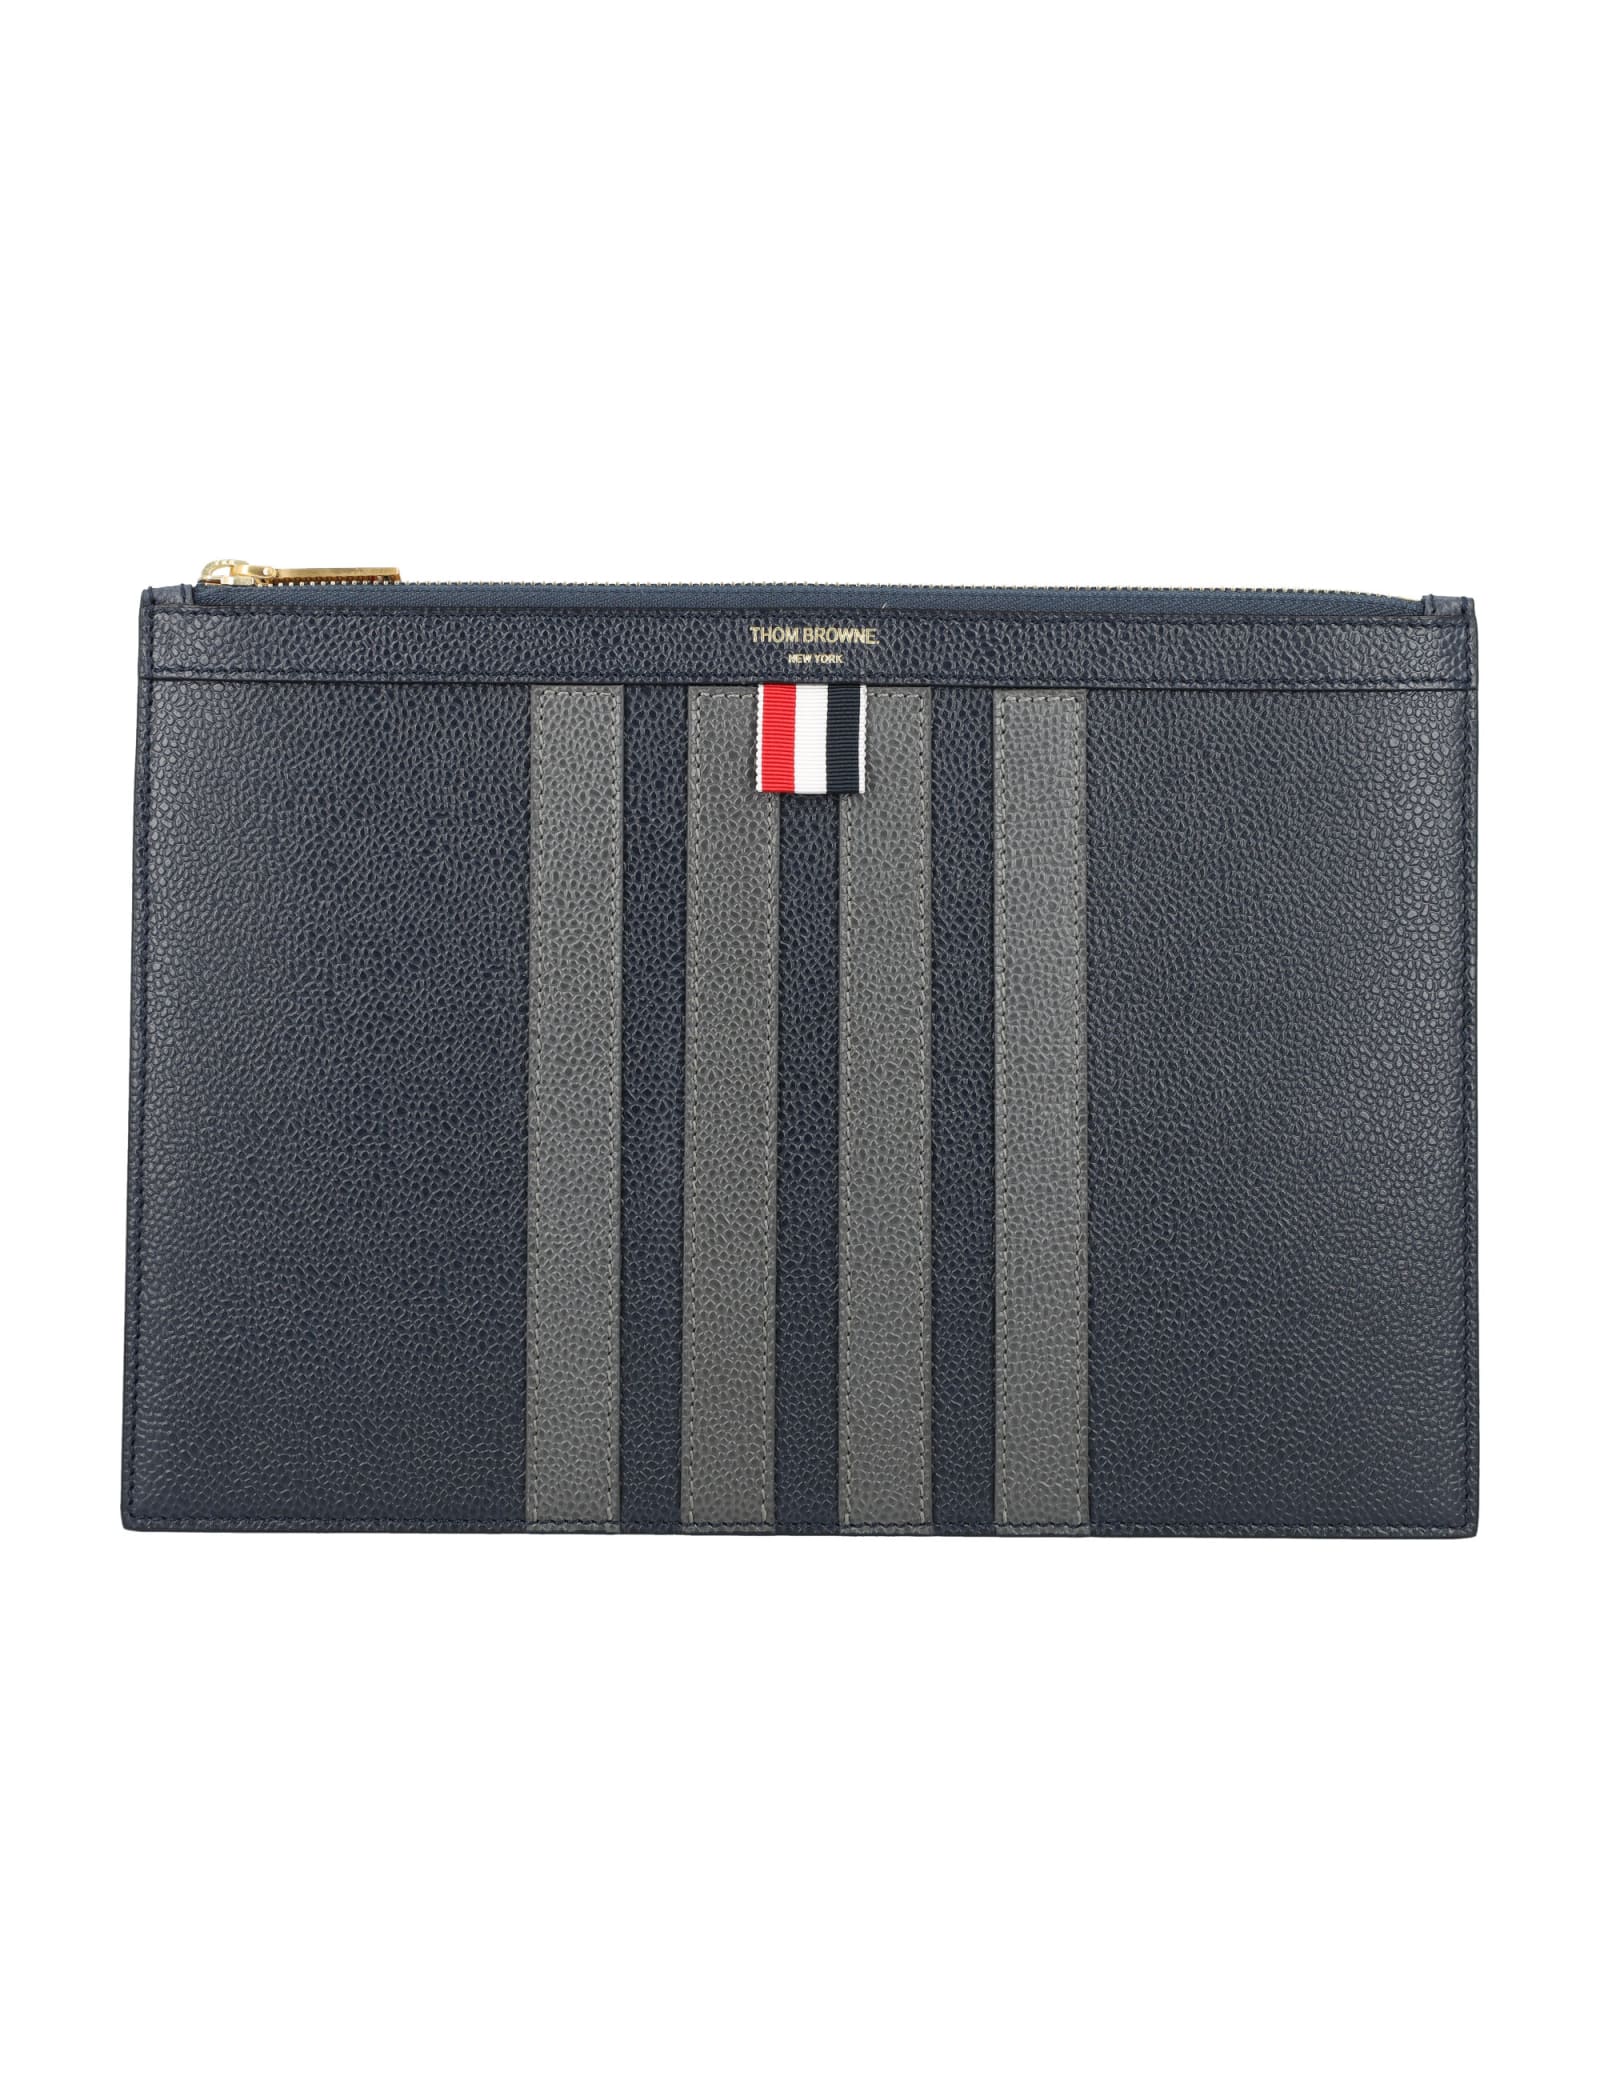 Thom Browne Pebble Grain Leather 4 Bar Small Document Holder